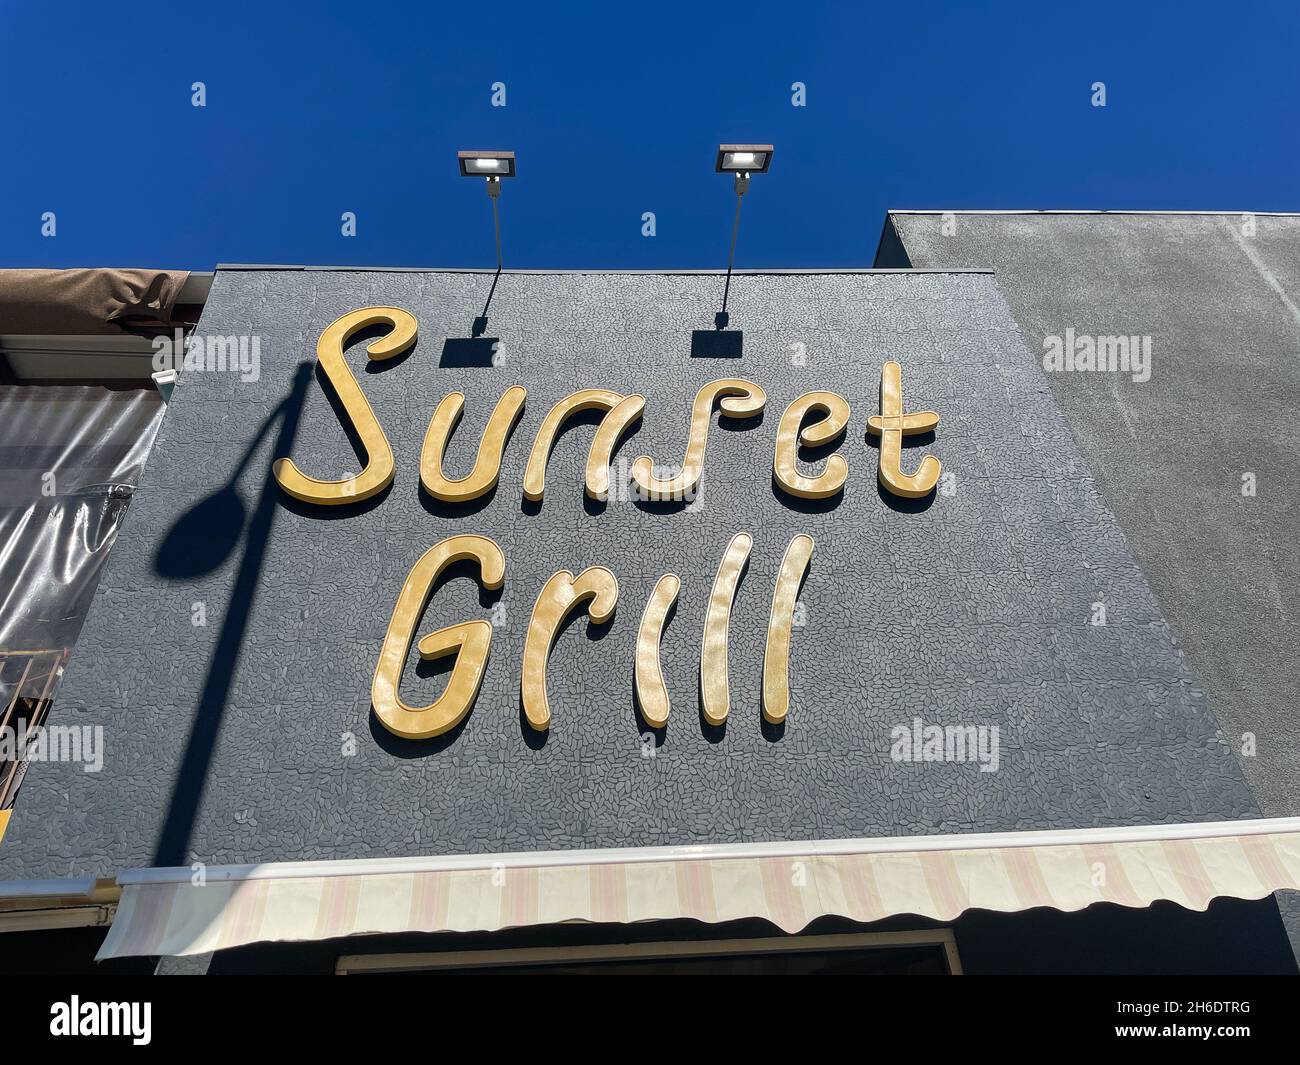 Los Angeles, CA, USA - November 14, 2021: Exterior of the Sunset Grill on Sunset  Boulevard in Los Angeles, California Stock Photo - Alamy